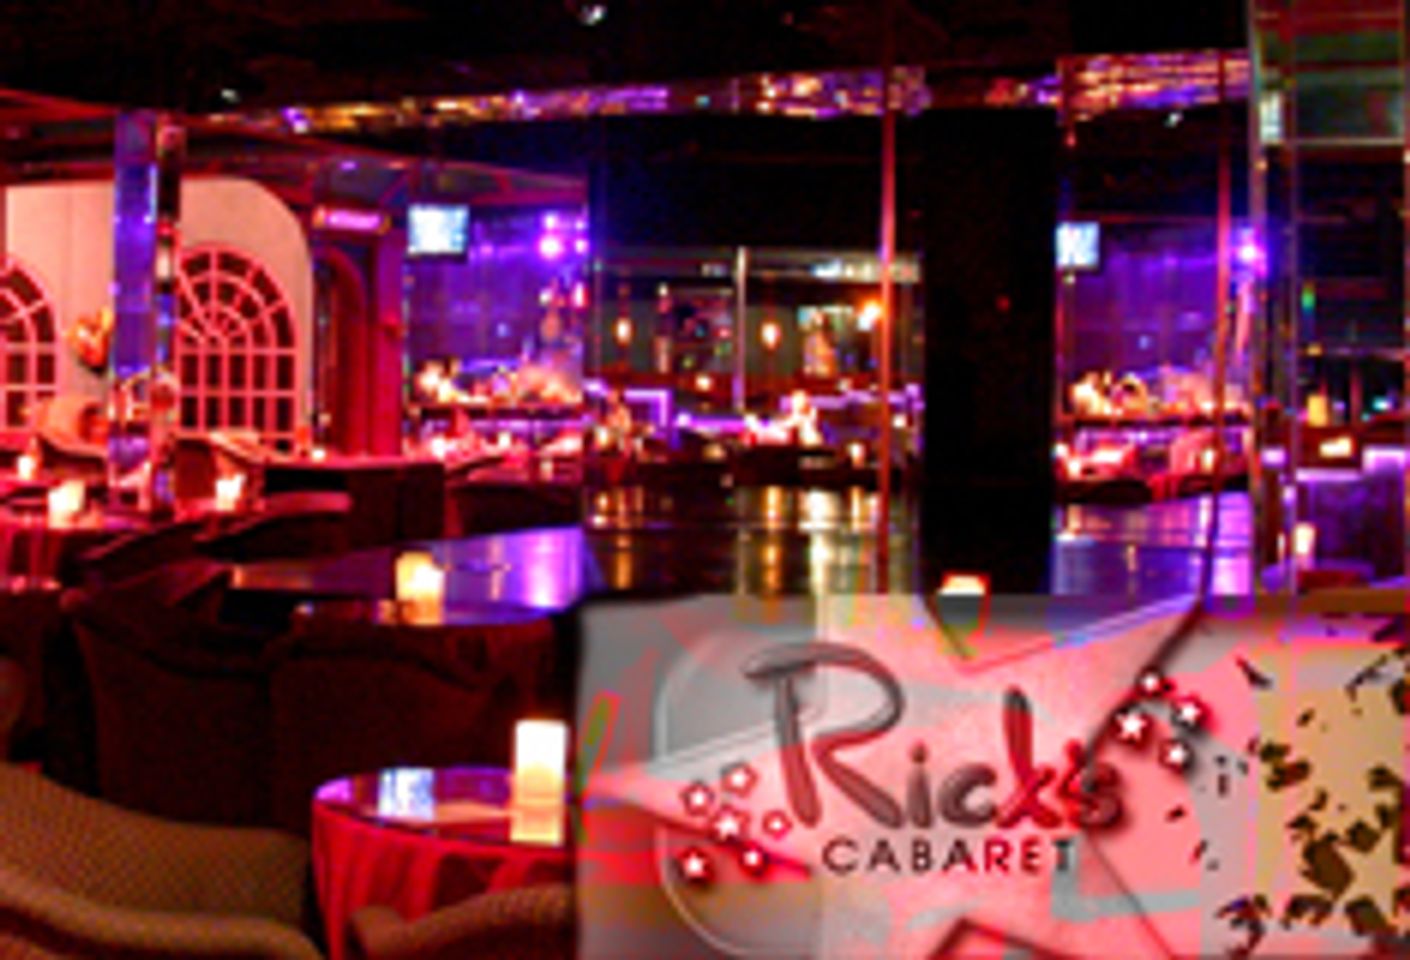 Ric's Cabaret Aims for Upscale Black Cliental with Club Onyx